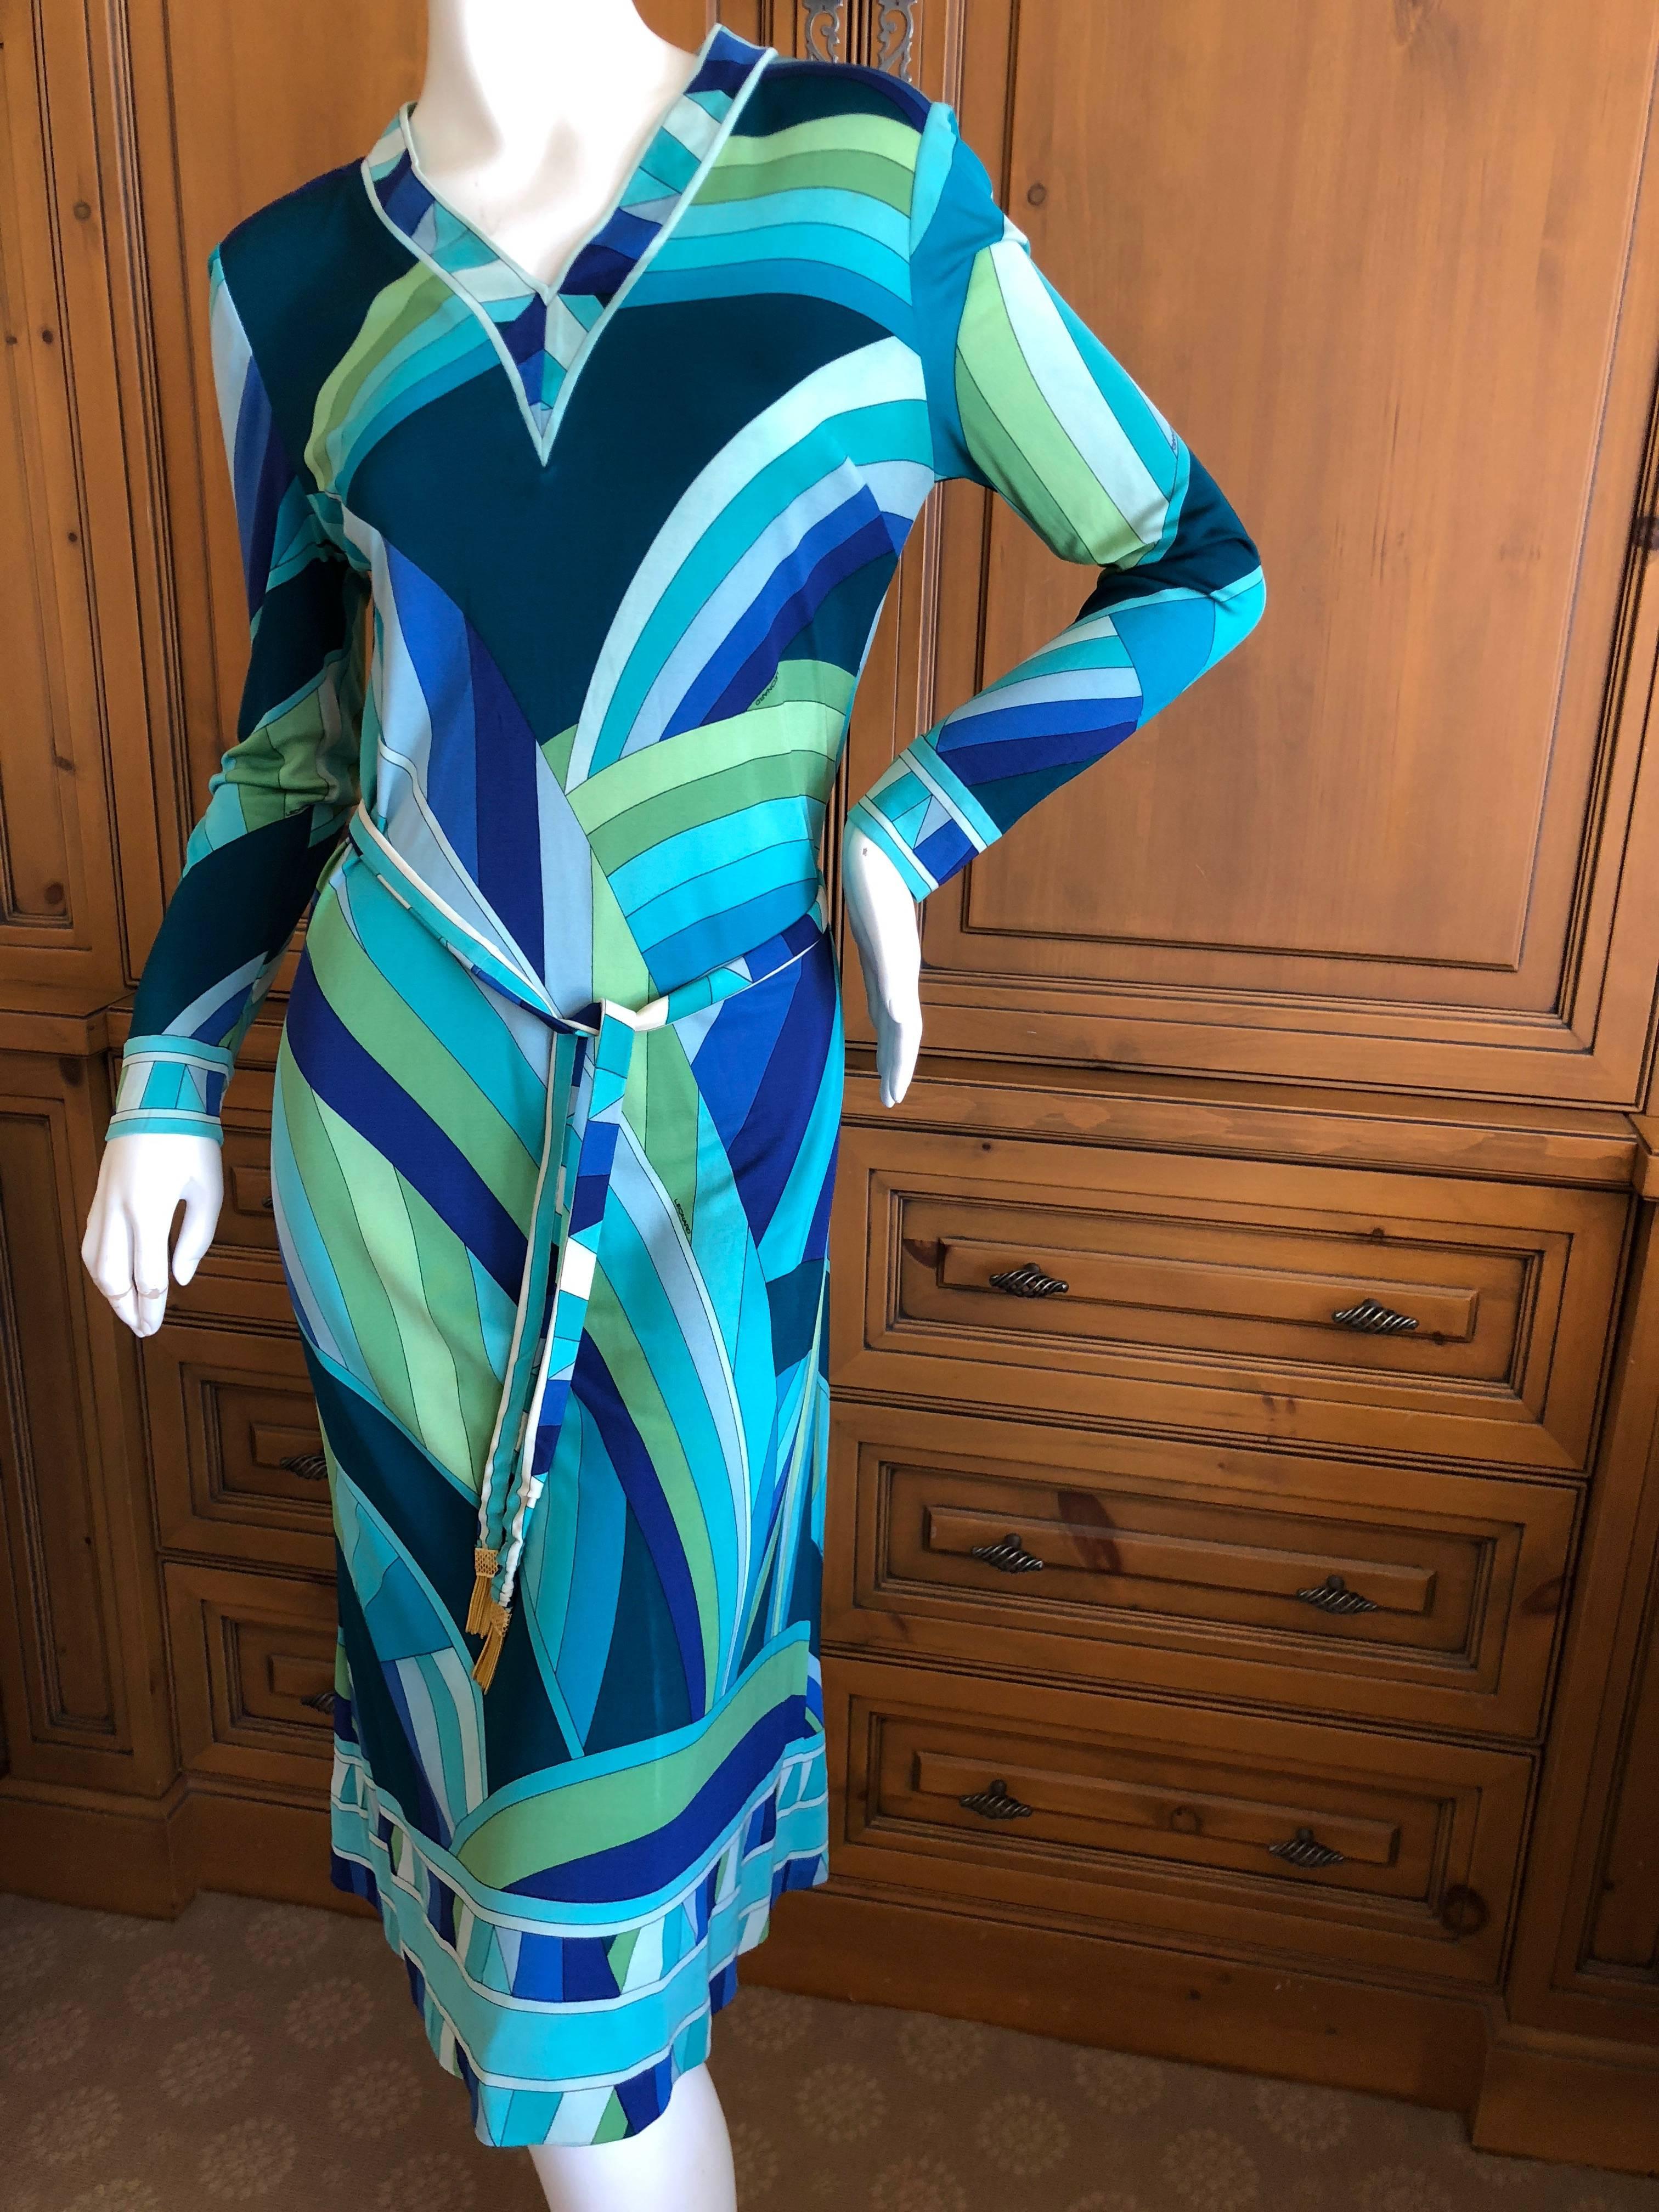 Leonard Paris for Bergdorf Goodman 1970's Silk Dress with Belt.
Leonard , Paris was a contemporary of Pucci, using silk jersey printed in their signature florals, Leonard was as expensive, if not more, than Pucci.
 Featuring a vee neck, long sleeves